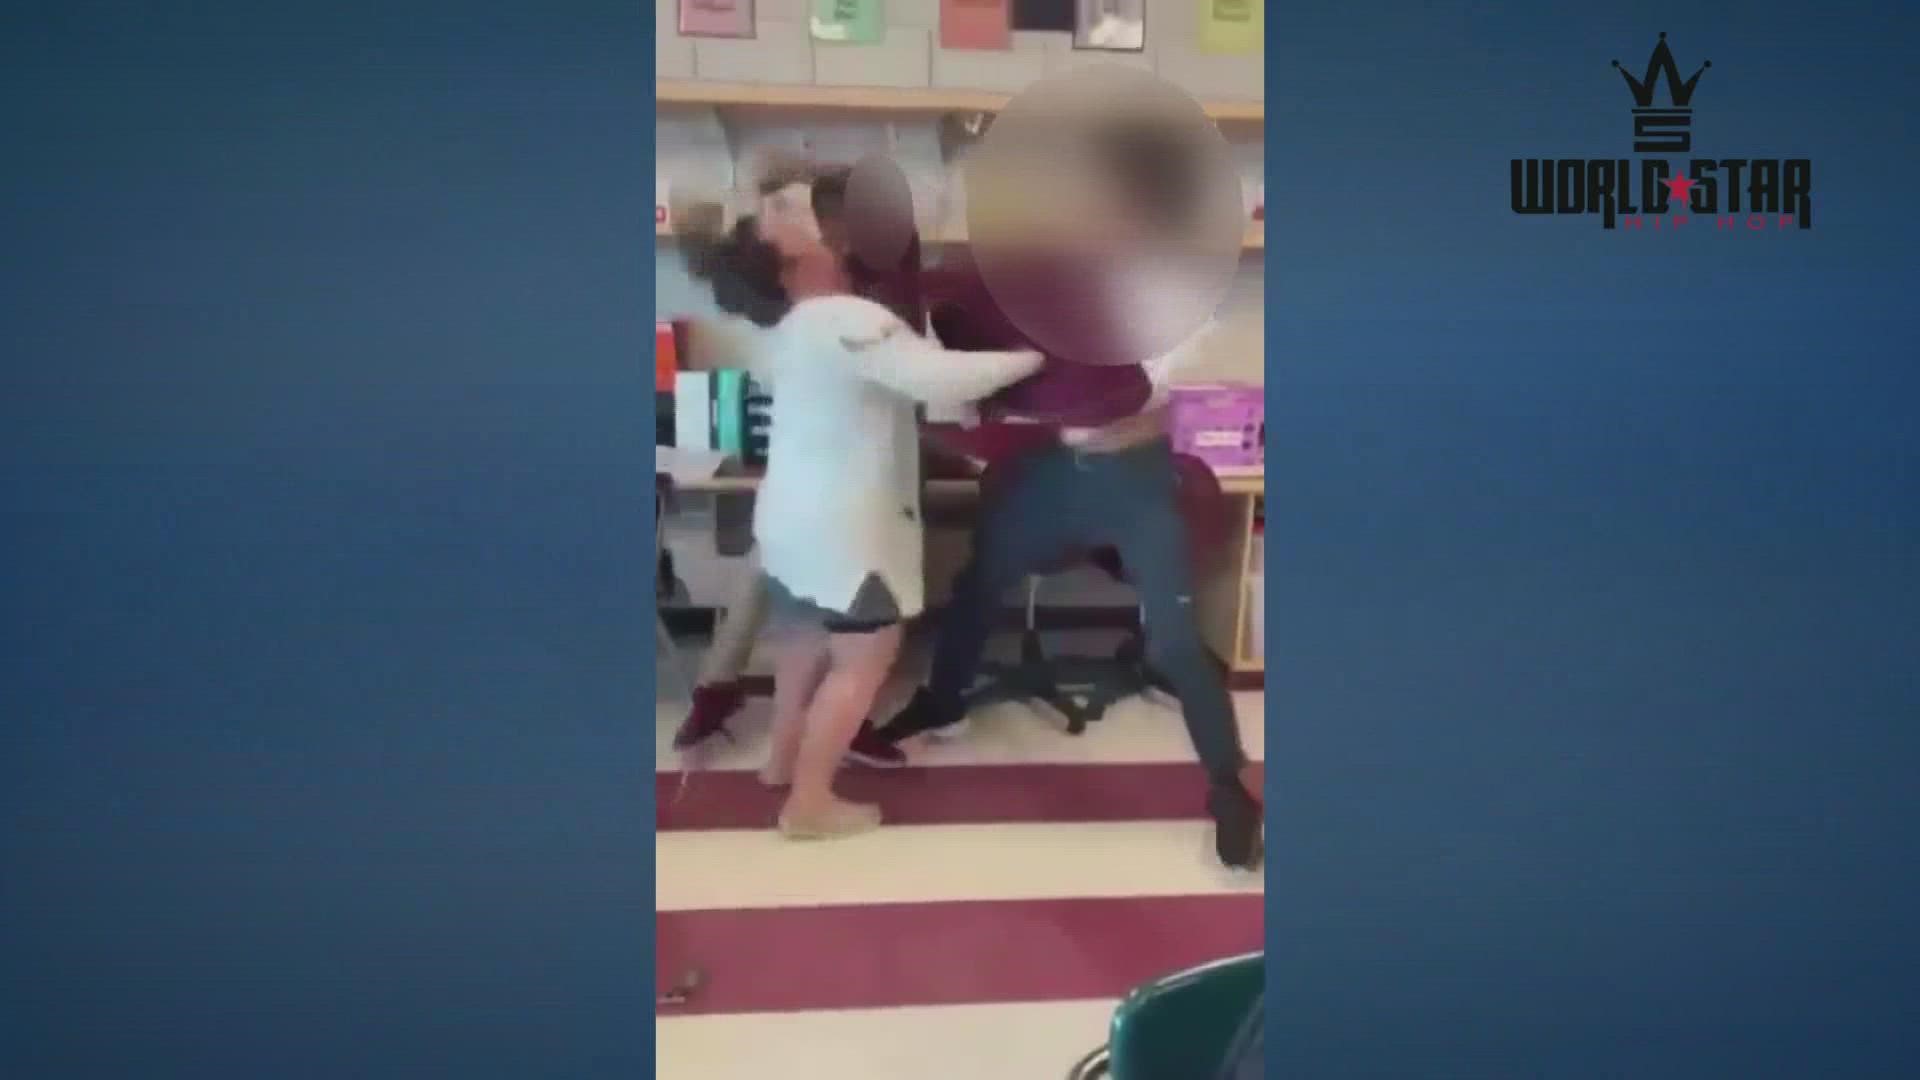 The school said they do not tolerate this kind of behavior from students.